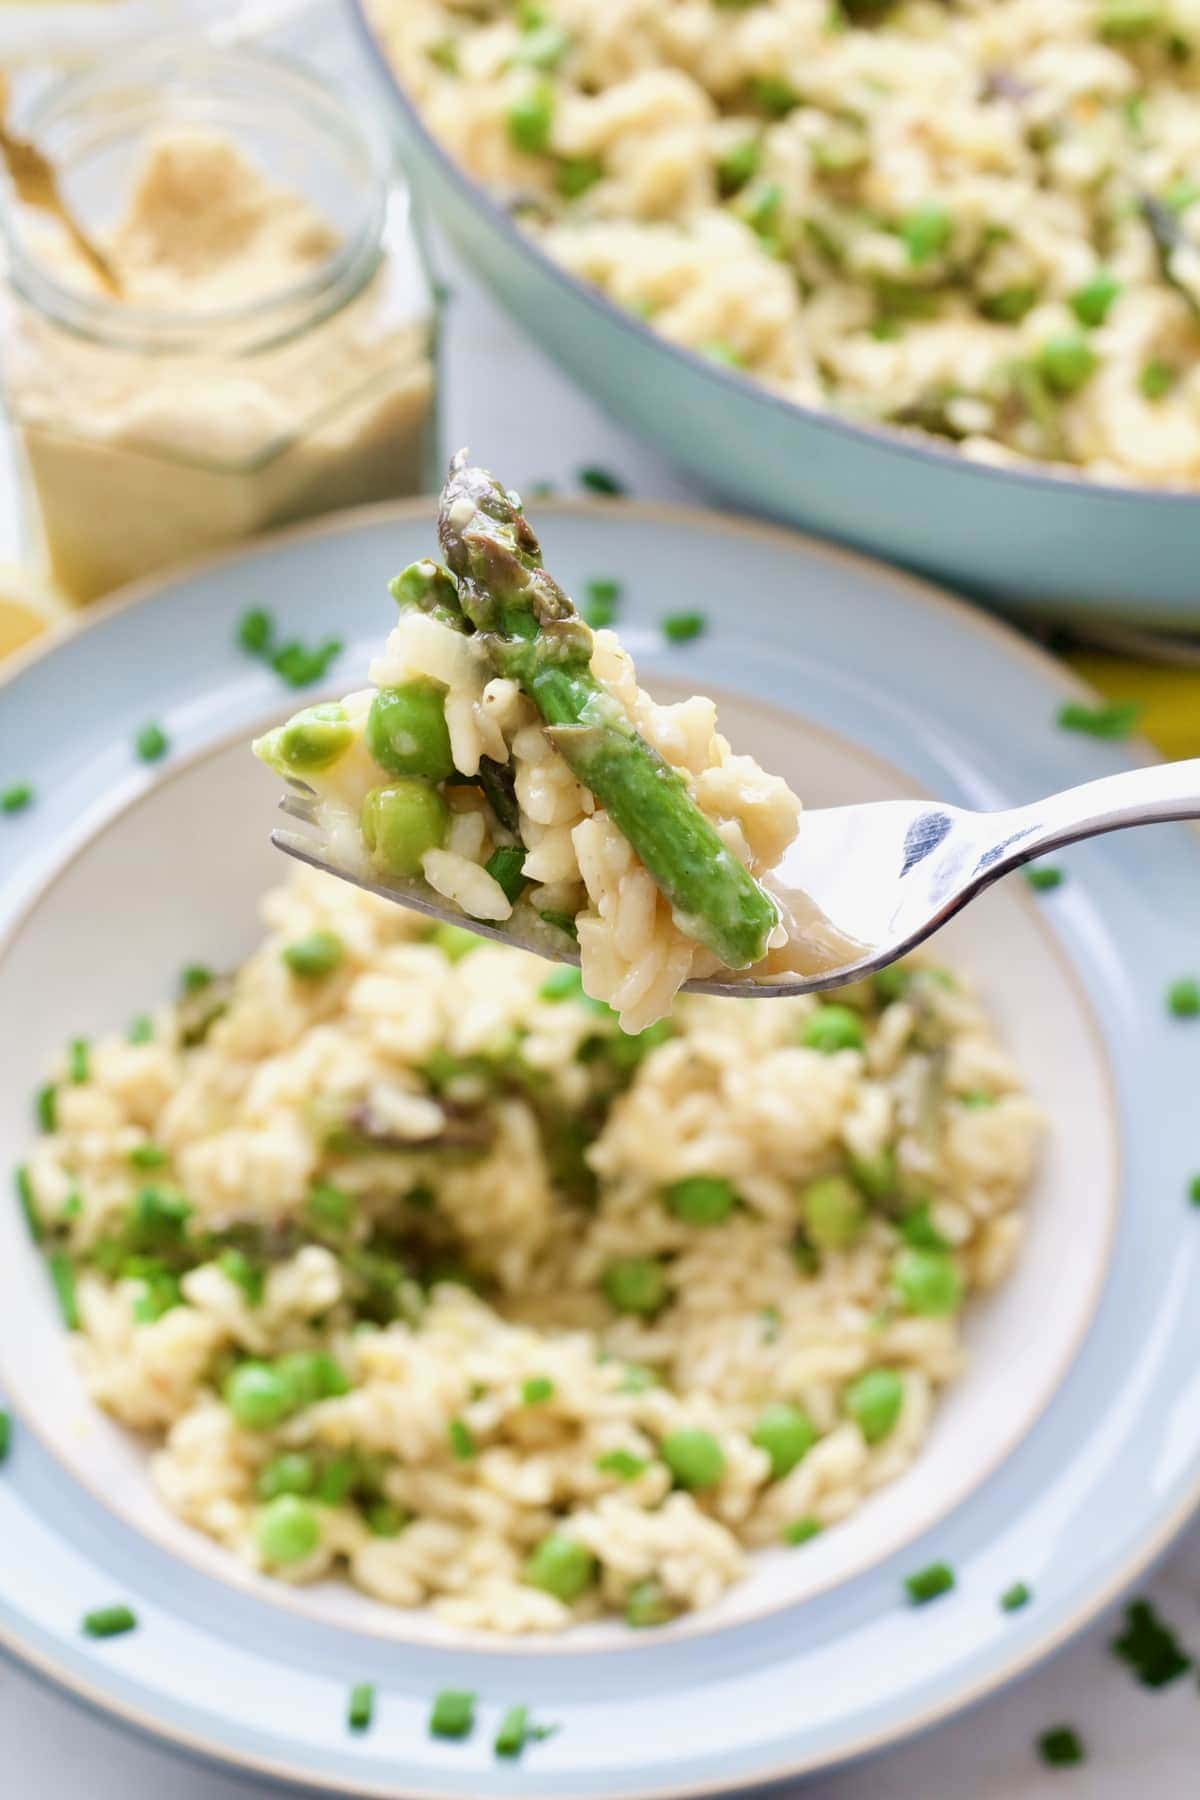 Small portion of pea and asparagus risotto on a fork.